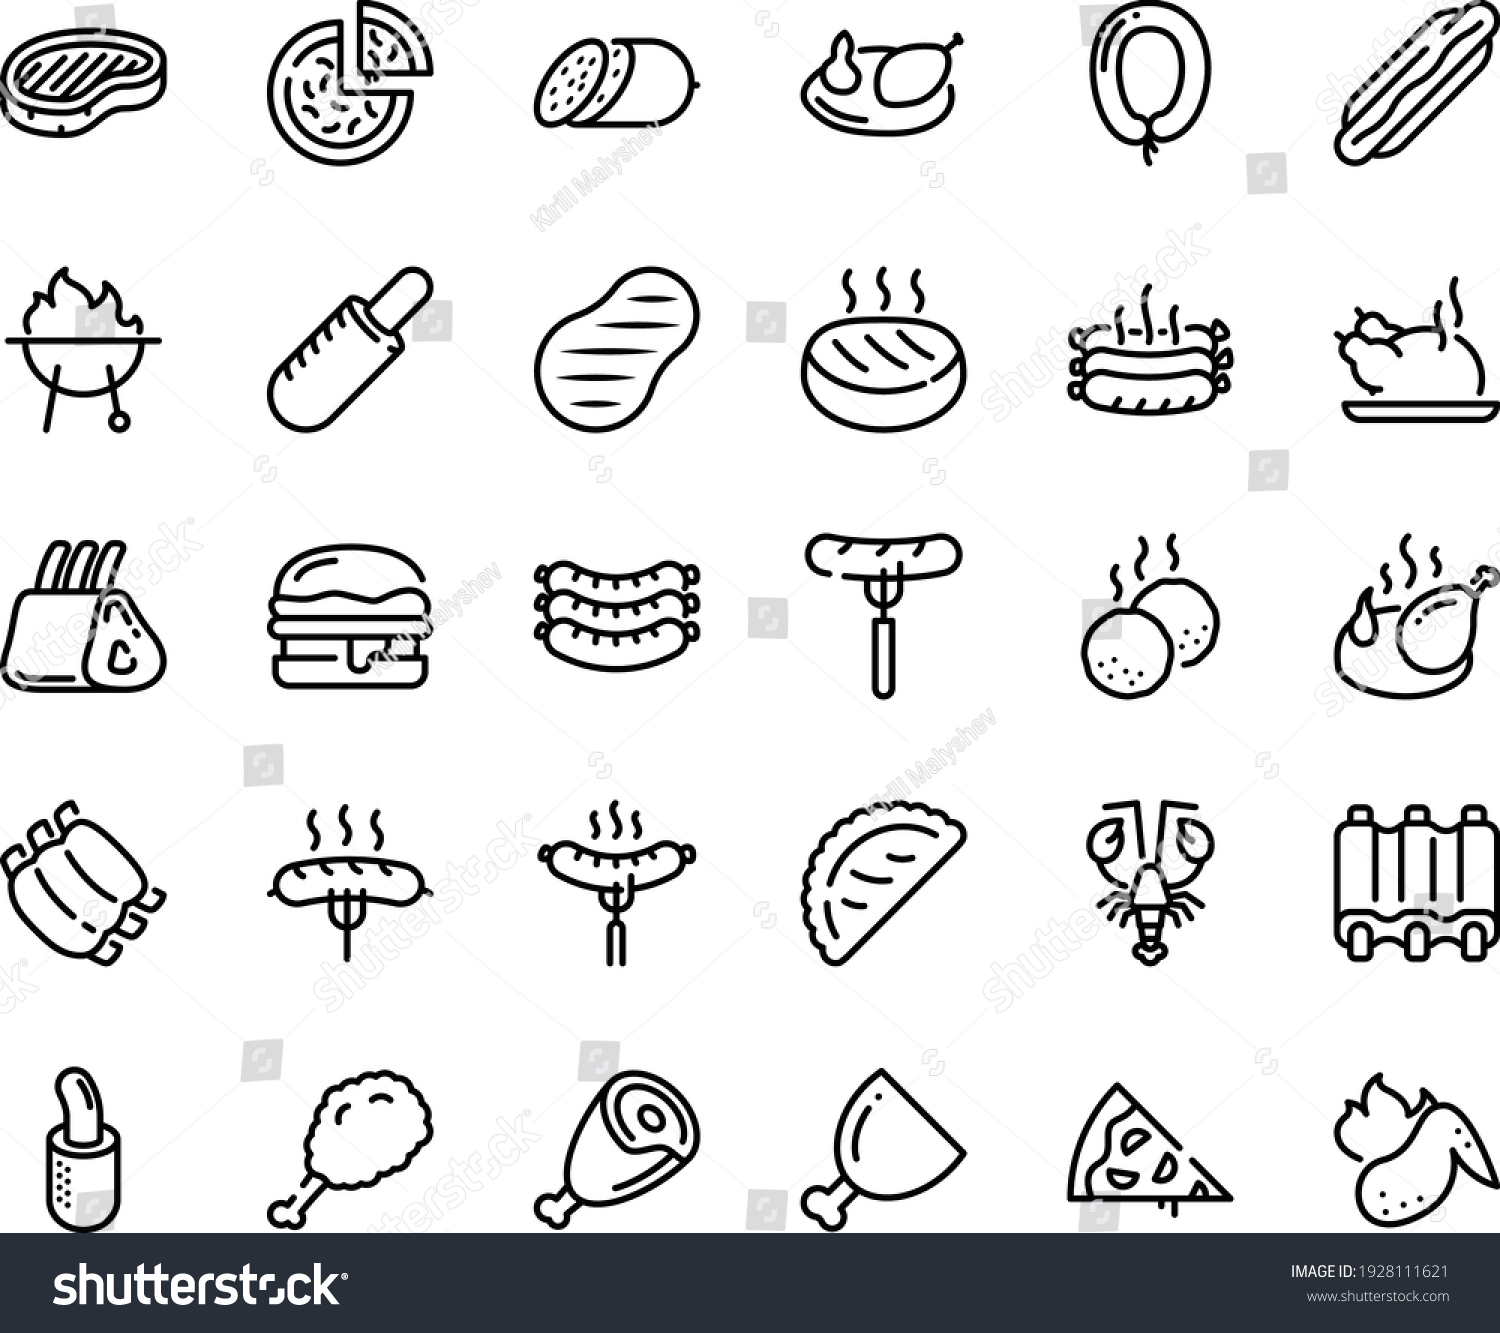 SVG of Food line icon set - pizza piece, hot dog, sausage on fork, fried chiken leg, french, chinese chicken, lobster, calsone, salami, sausages, steak, ham, burger, ribs, roasted, cutlet, meatballs, bbq svg